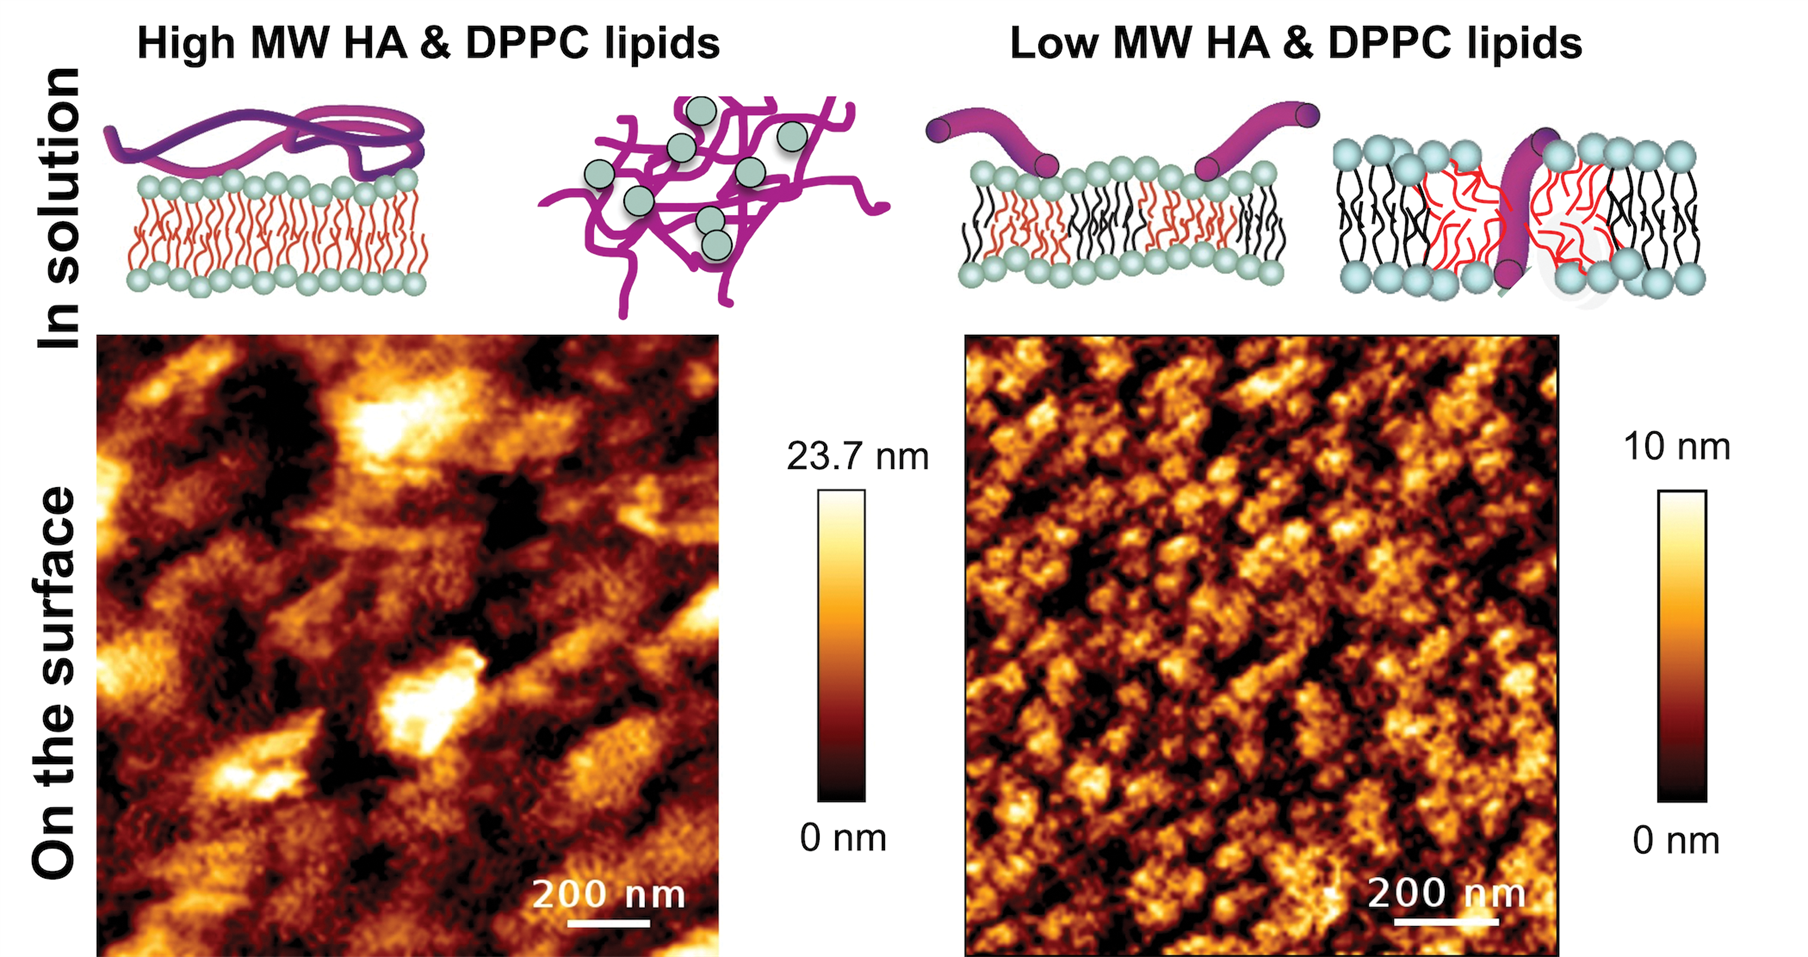 The interaction molecular weight of hyaluronan affects how it interacts with phospholipids, which in turn determines the nature of the protective film that can be formed on surfaces.